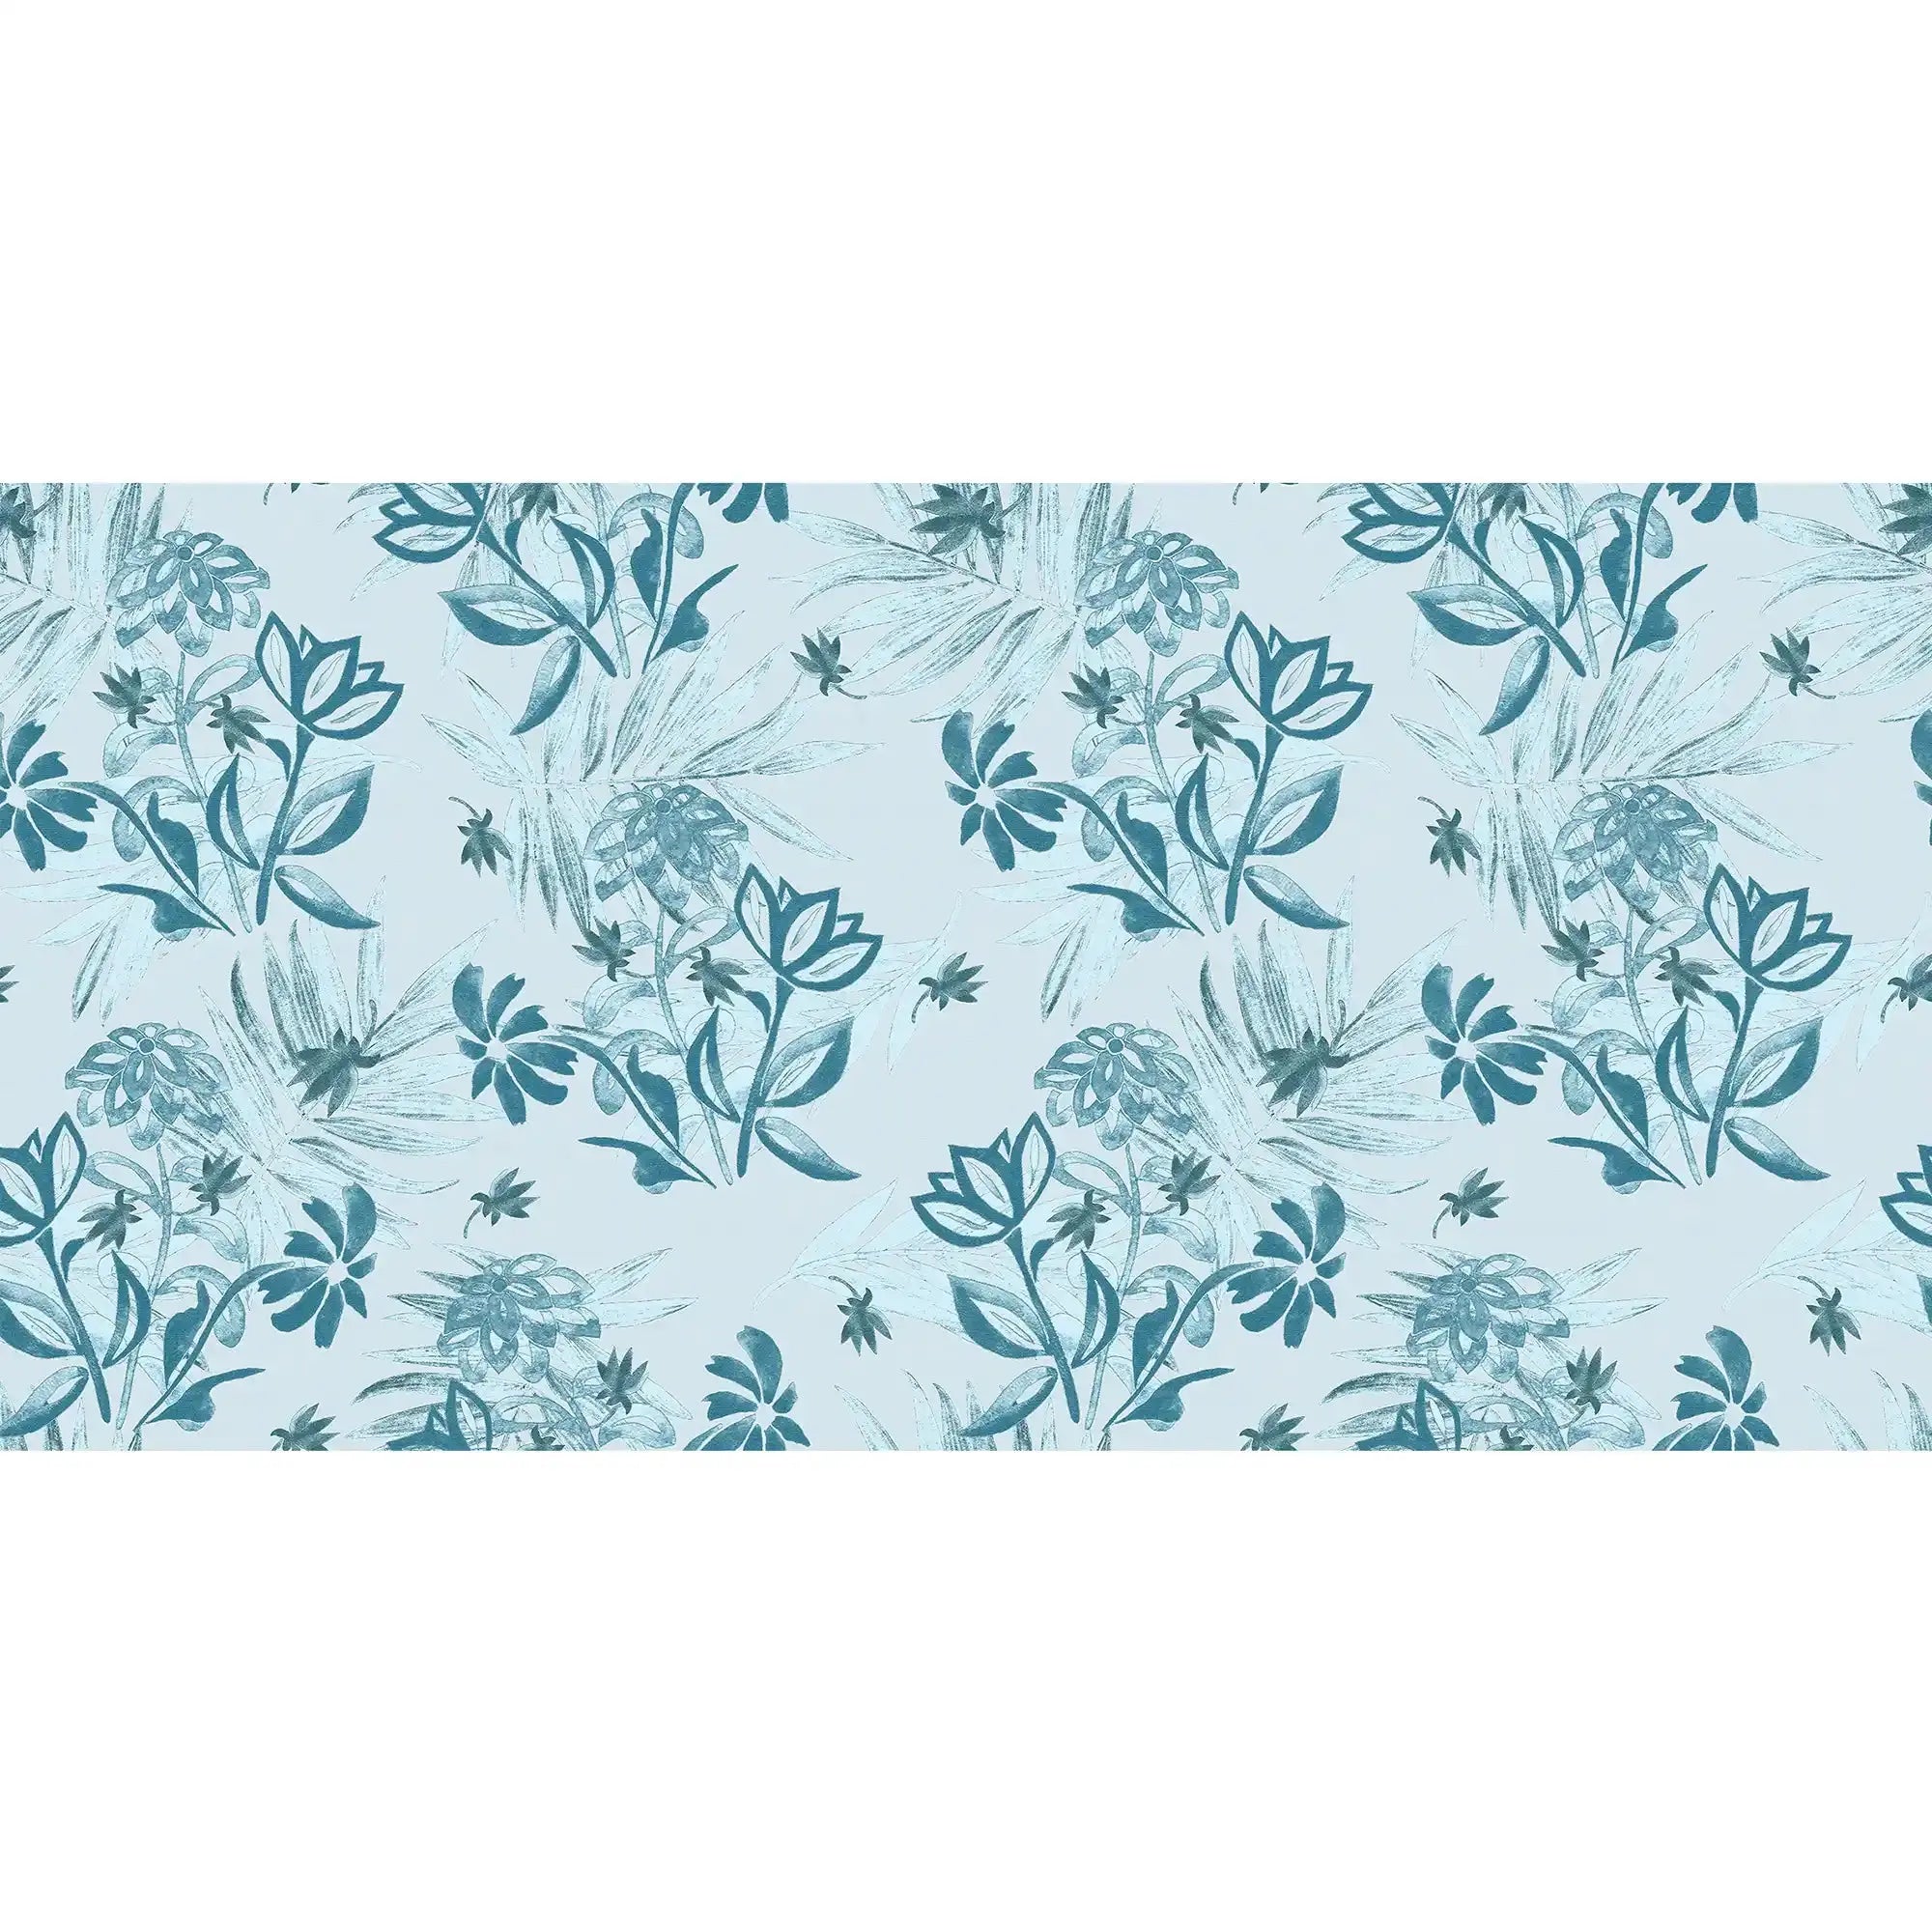 3086-D / Plant Wallpaper: Self-Adhesive, Blue Hibiscus and Cypress Pattern, Floral Wall Mural for Modern Room Decor - Artevella